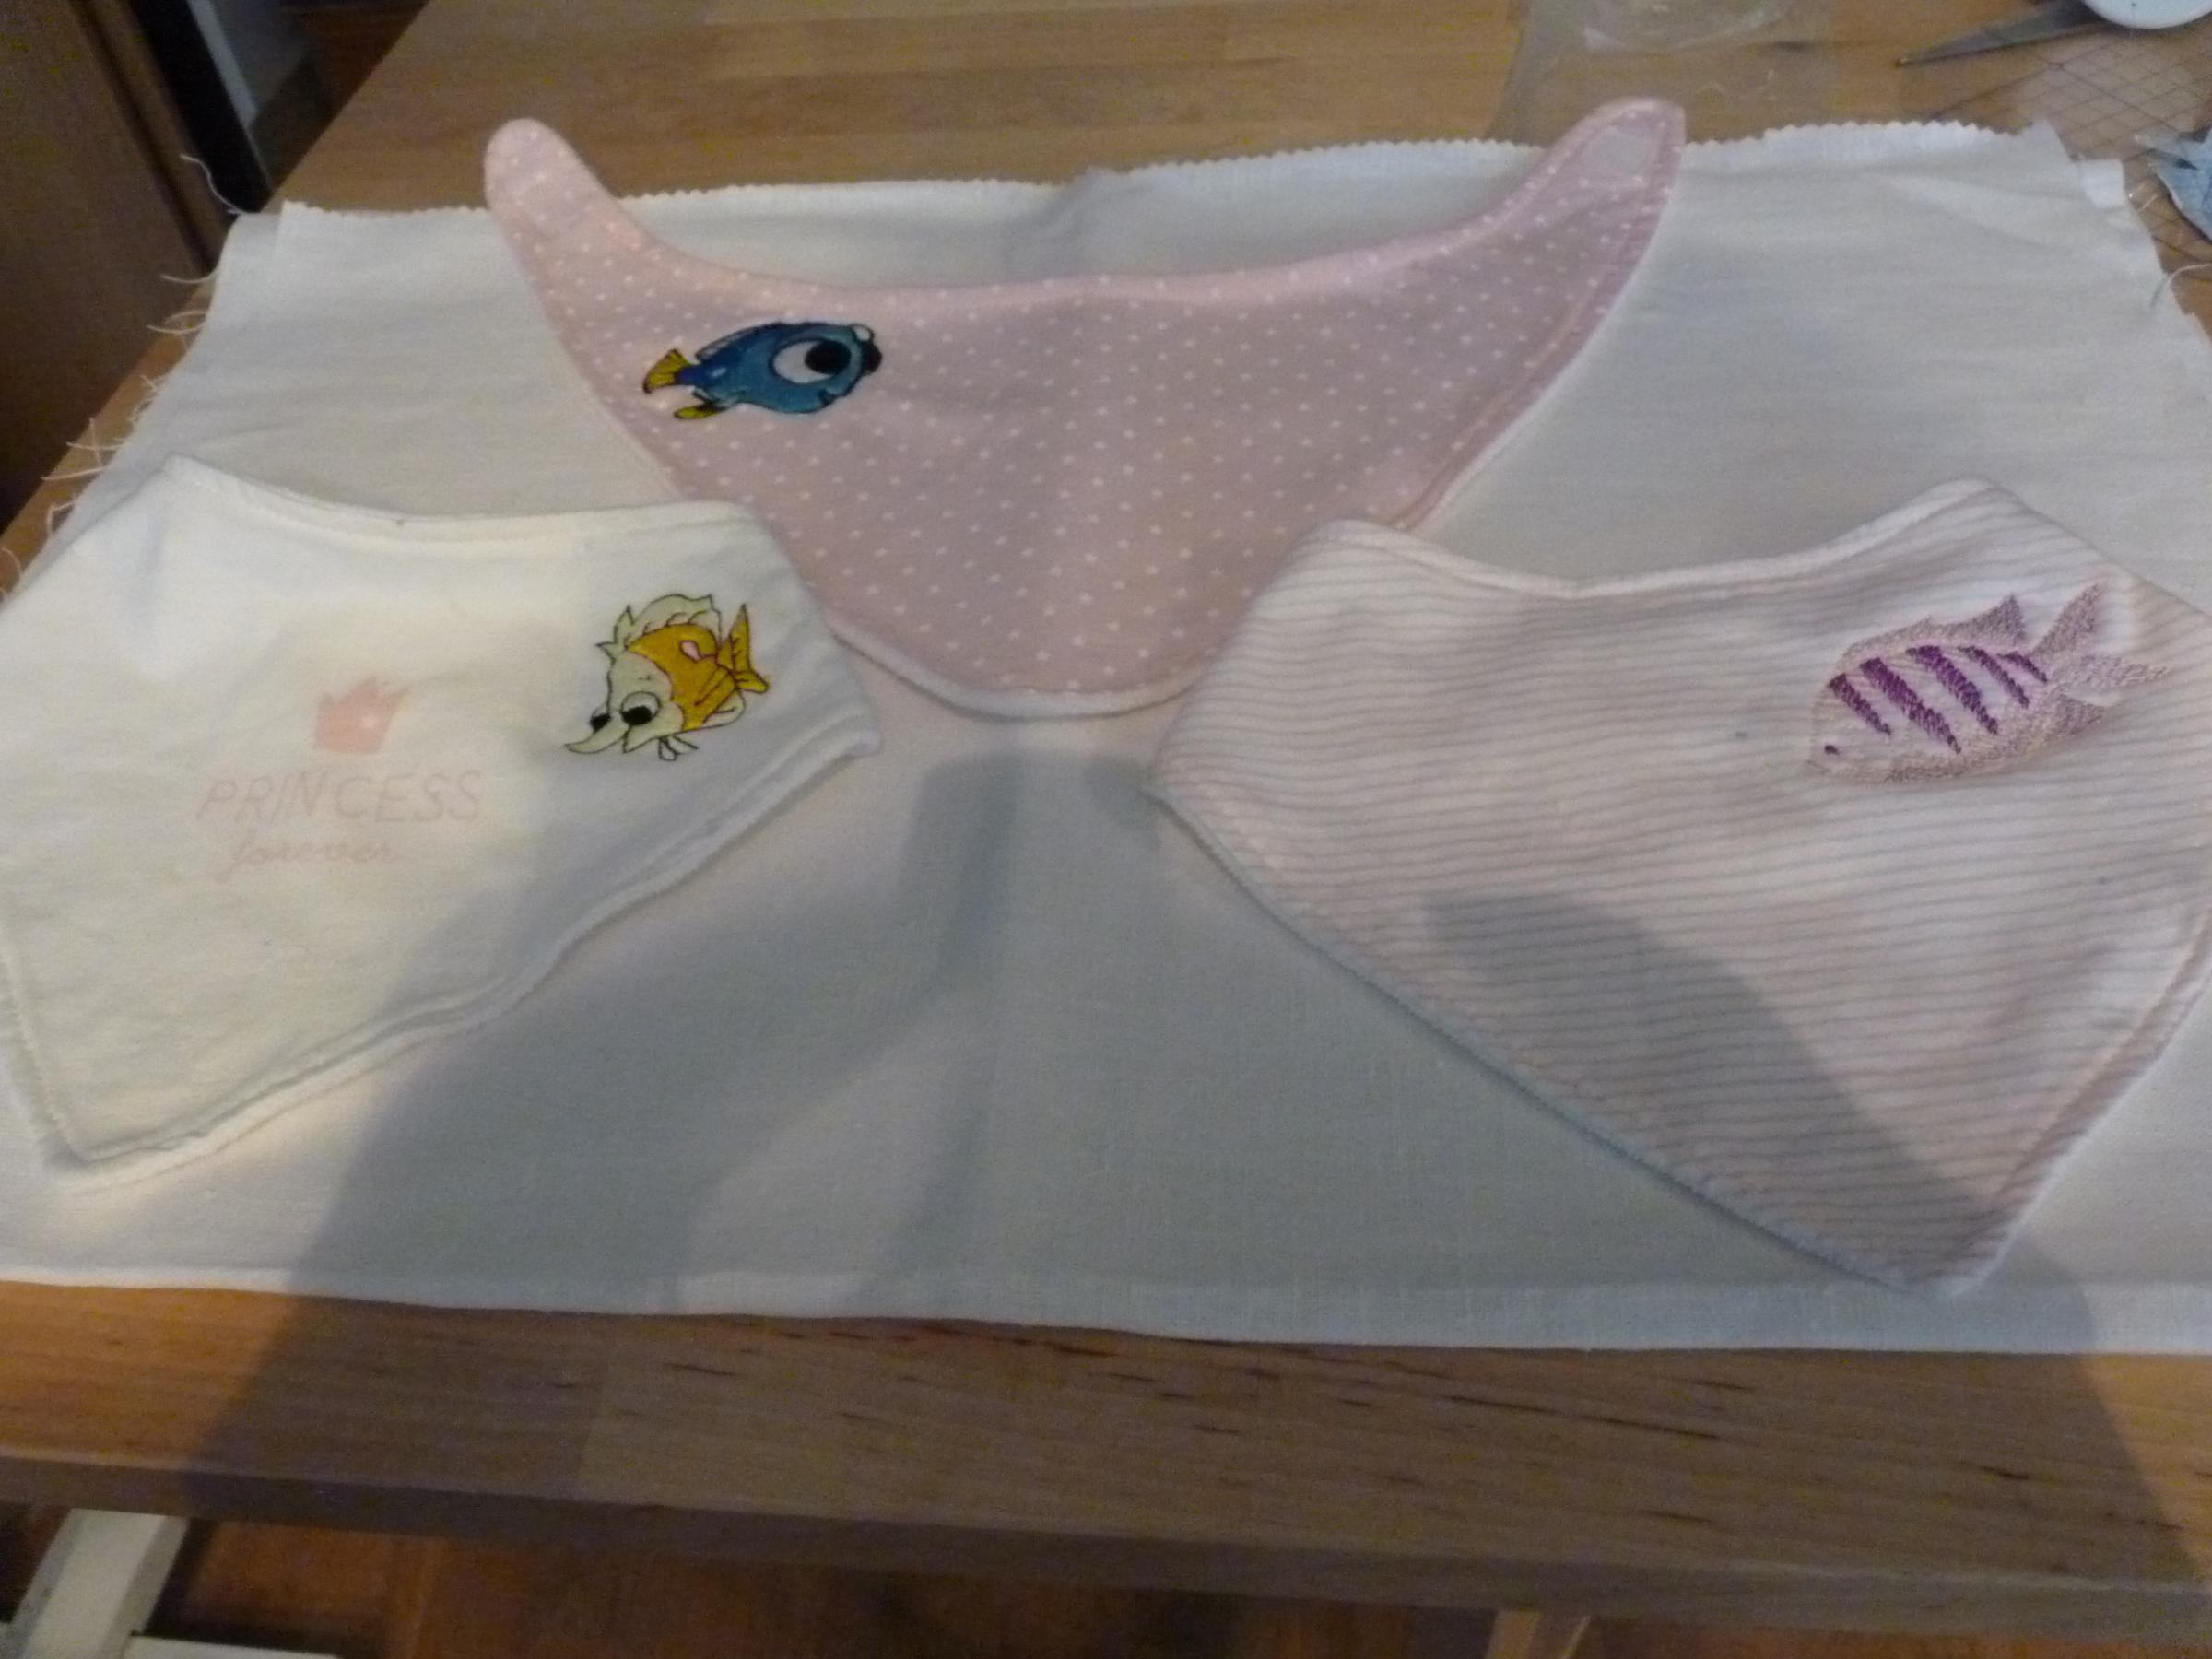 Baby outfit with fish embroidery designs